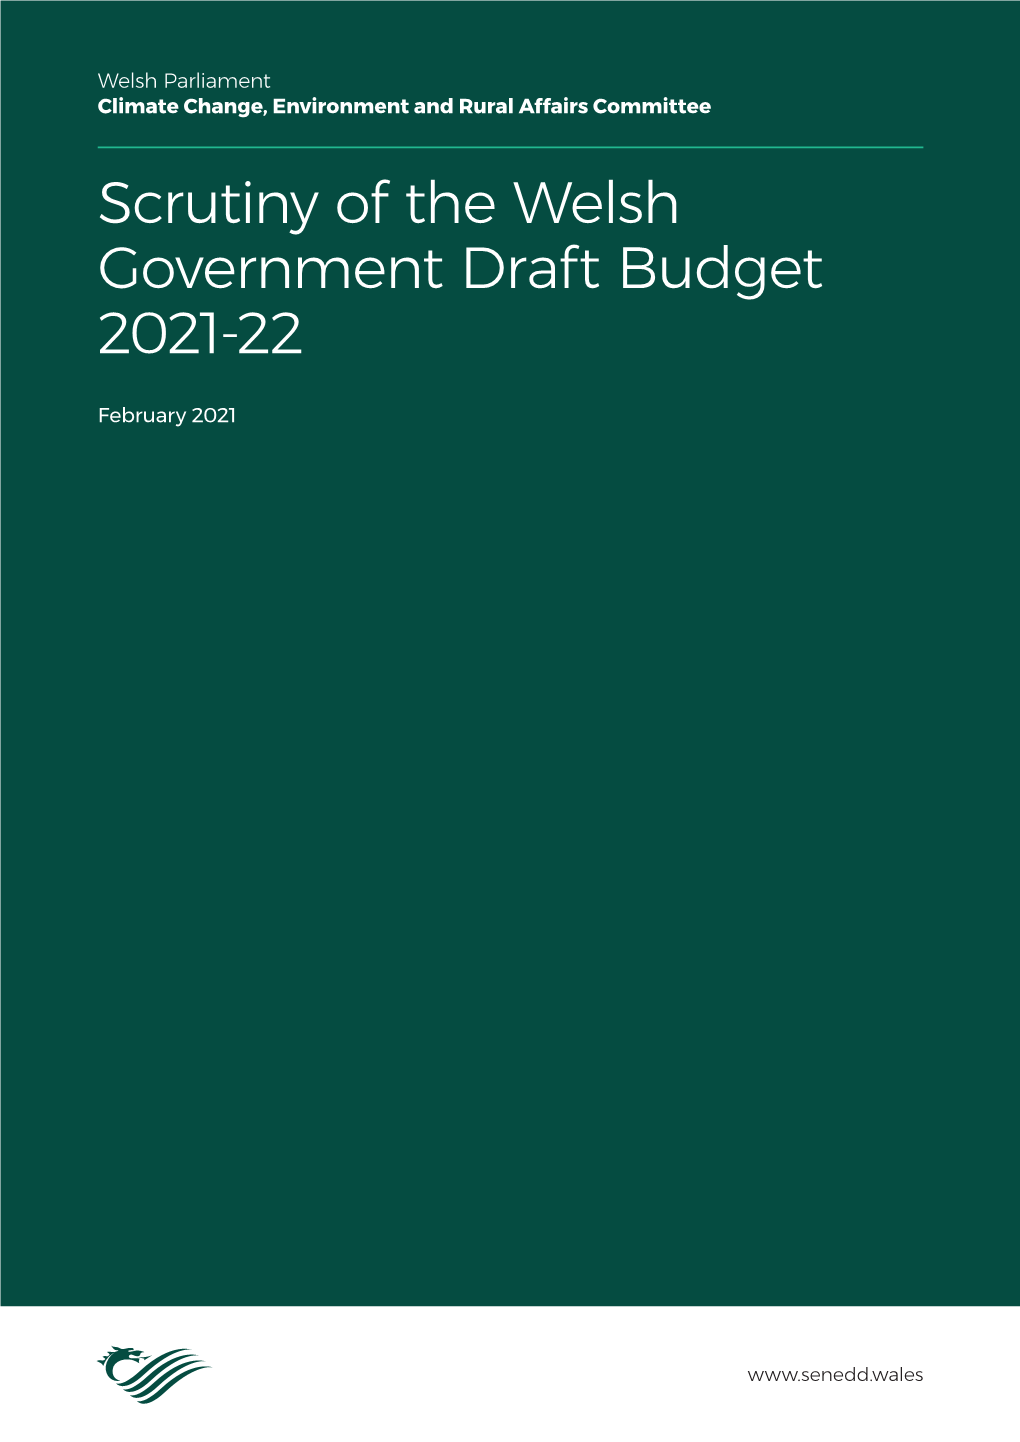 Welsh Government's Draft Budget 2021-22